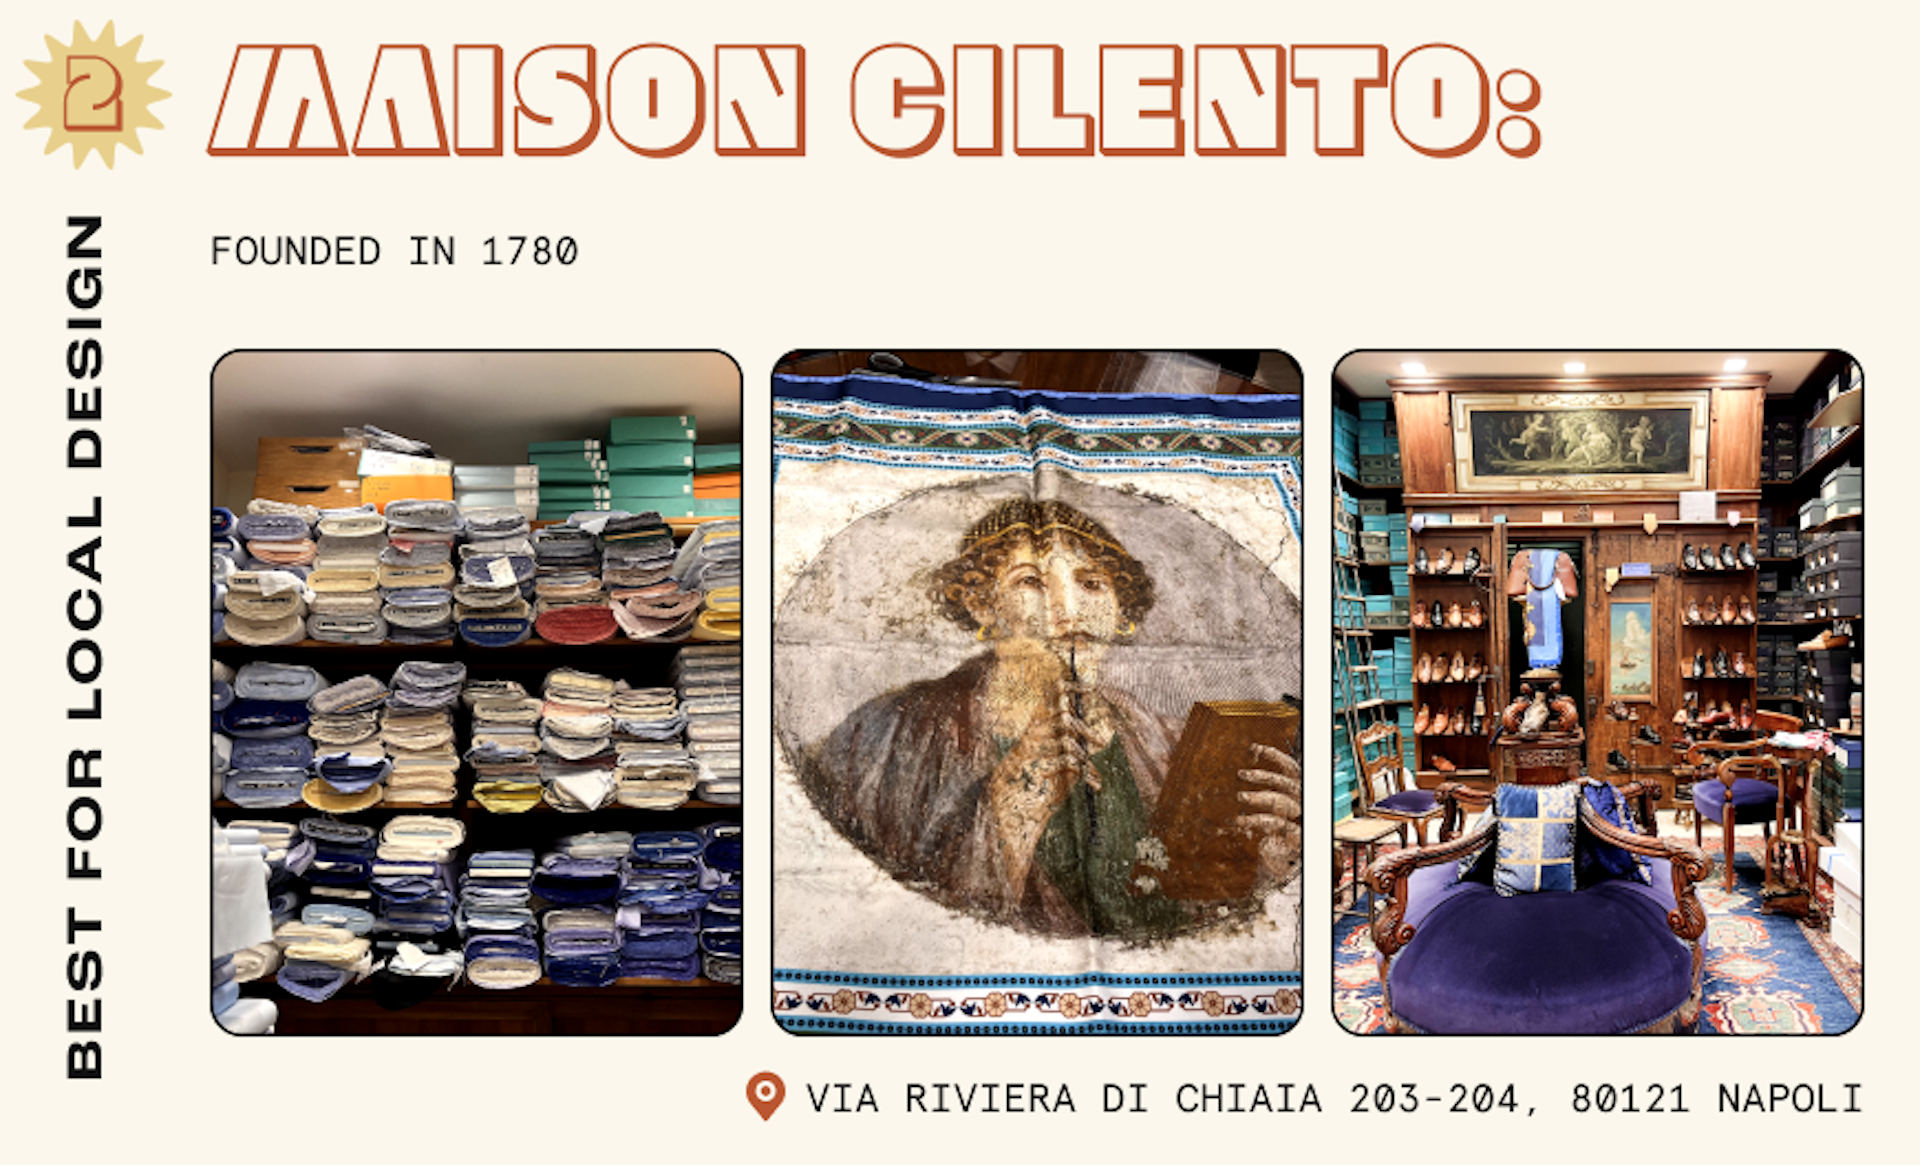 Fabric, ties and men shoes on display in one of Naples' oldest tailor shops